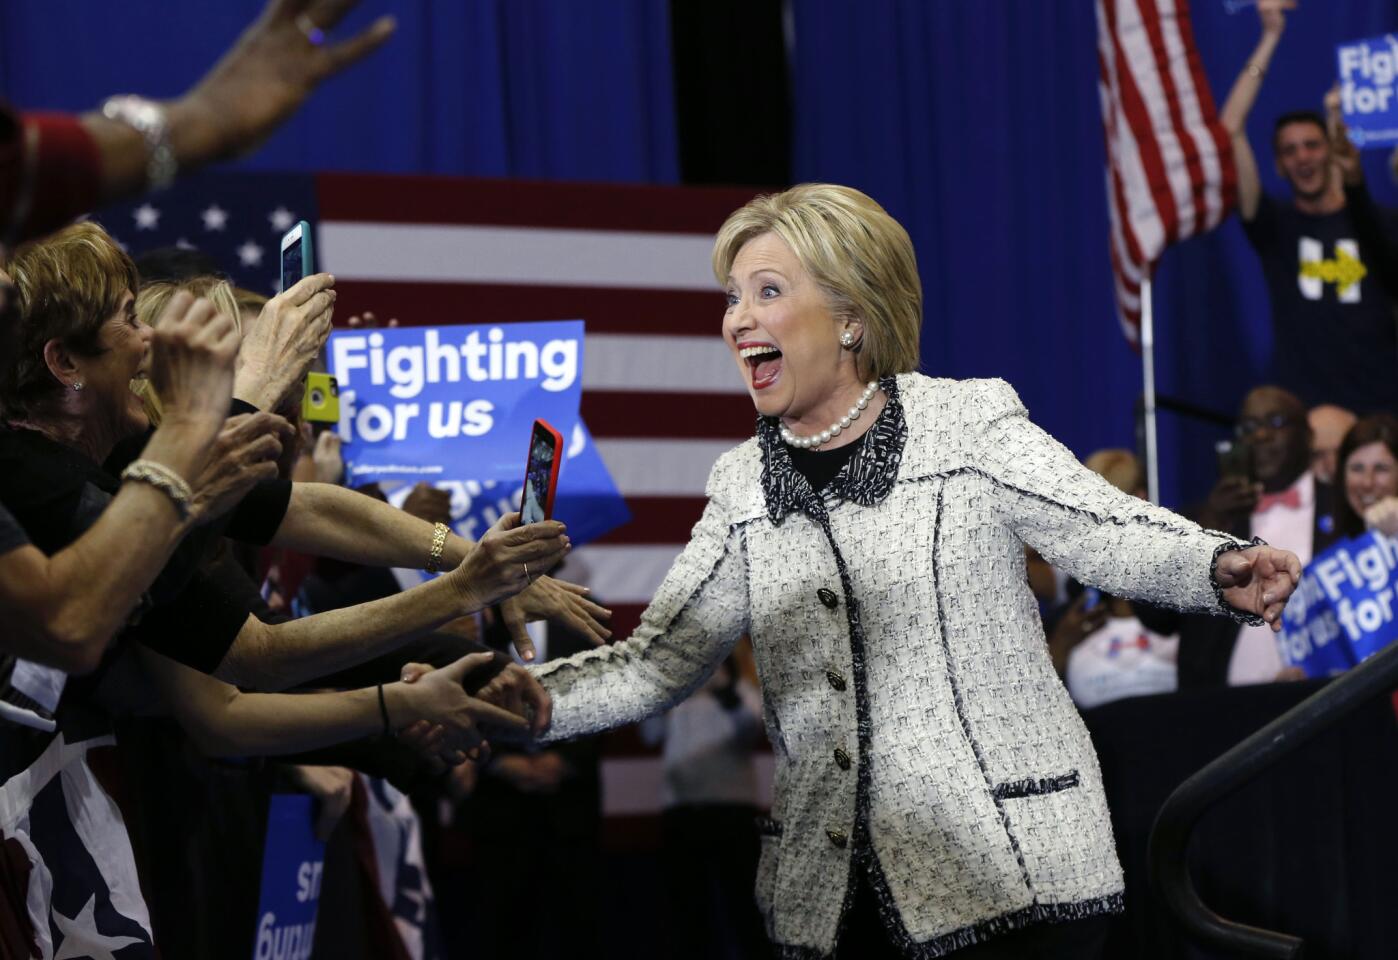 Hillary Clinton greets supporters at her victory celebration after winning the South Carolina Democratic primary.